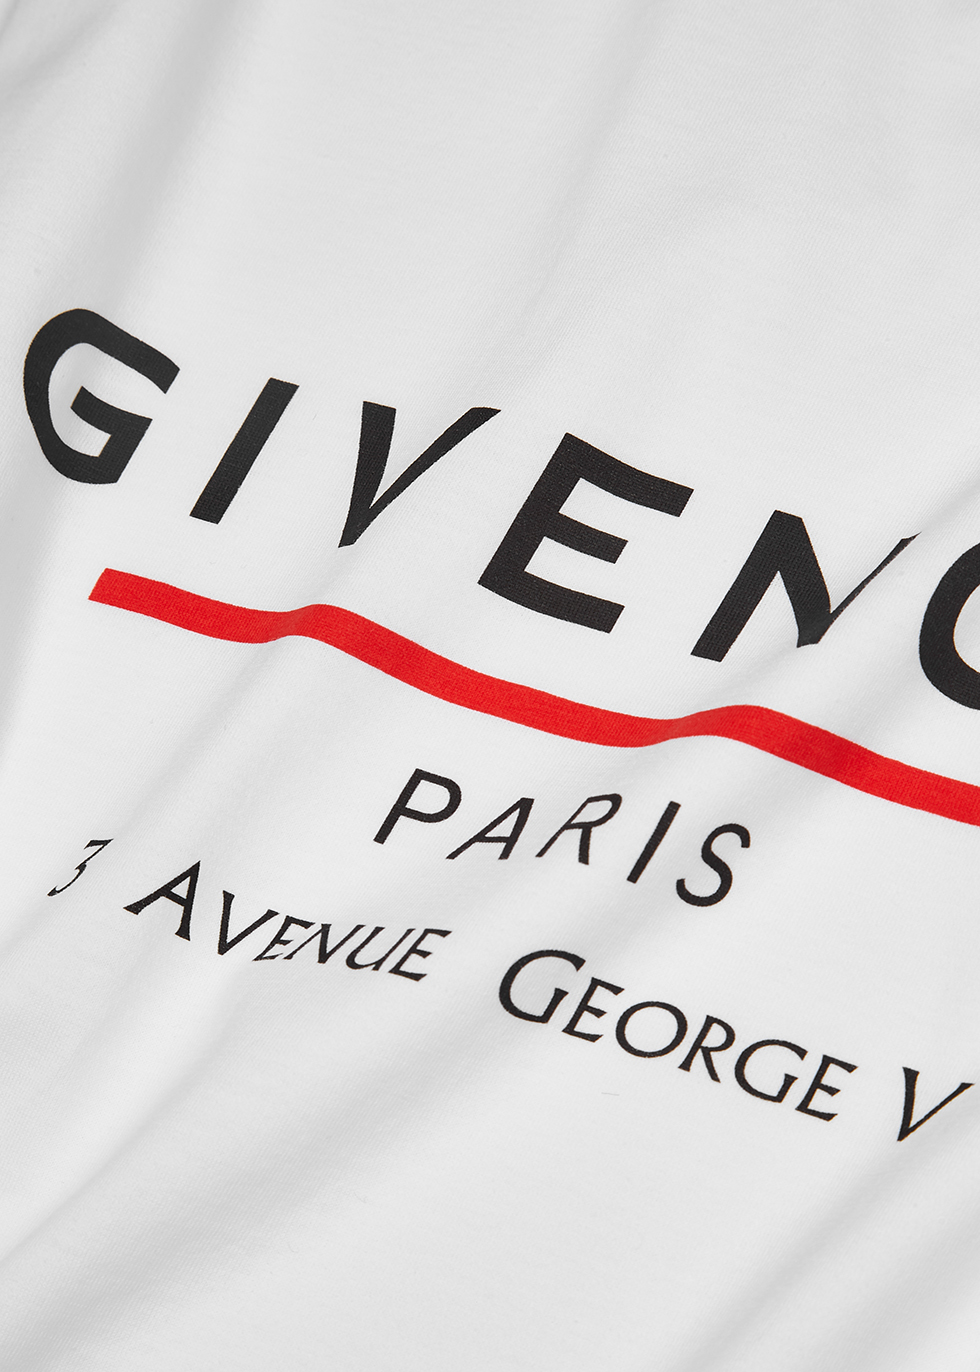 white givenchy